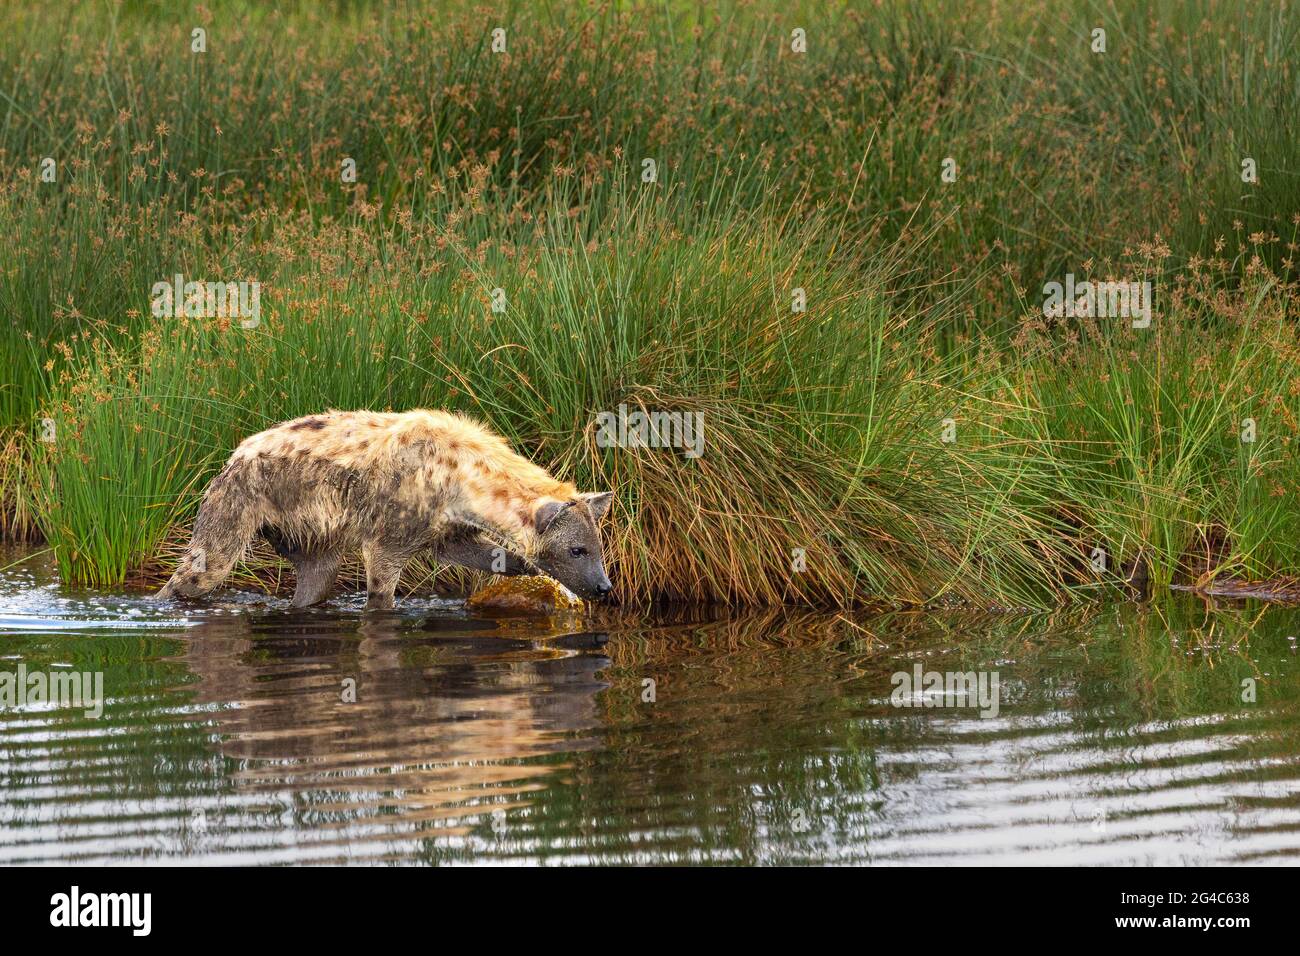 Spotted hyena by the water in Serengeti, Tanzania Stock Photo